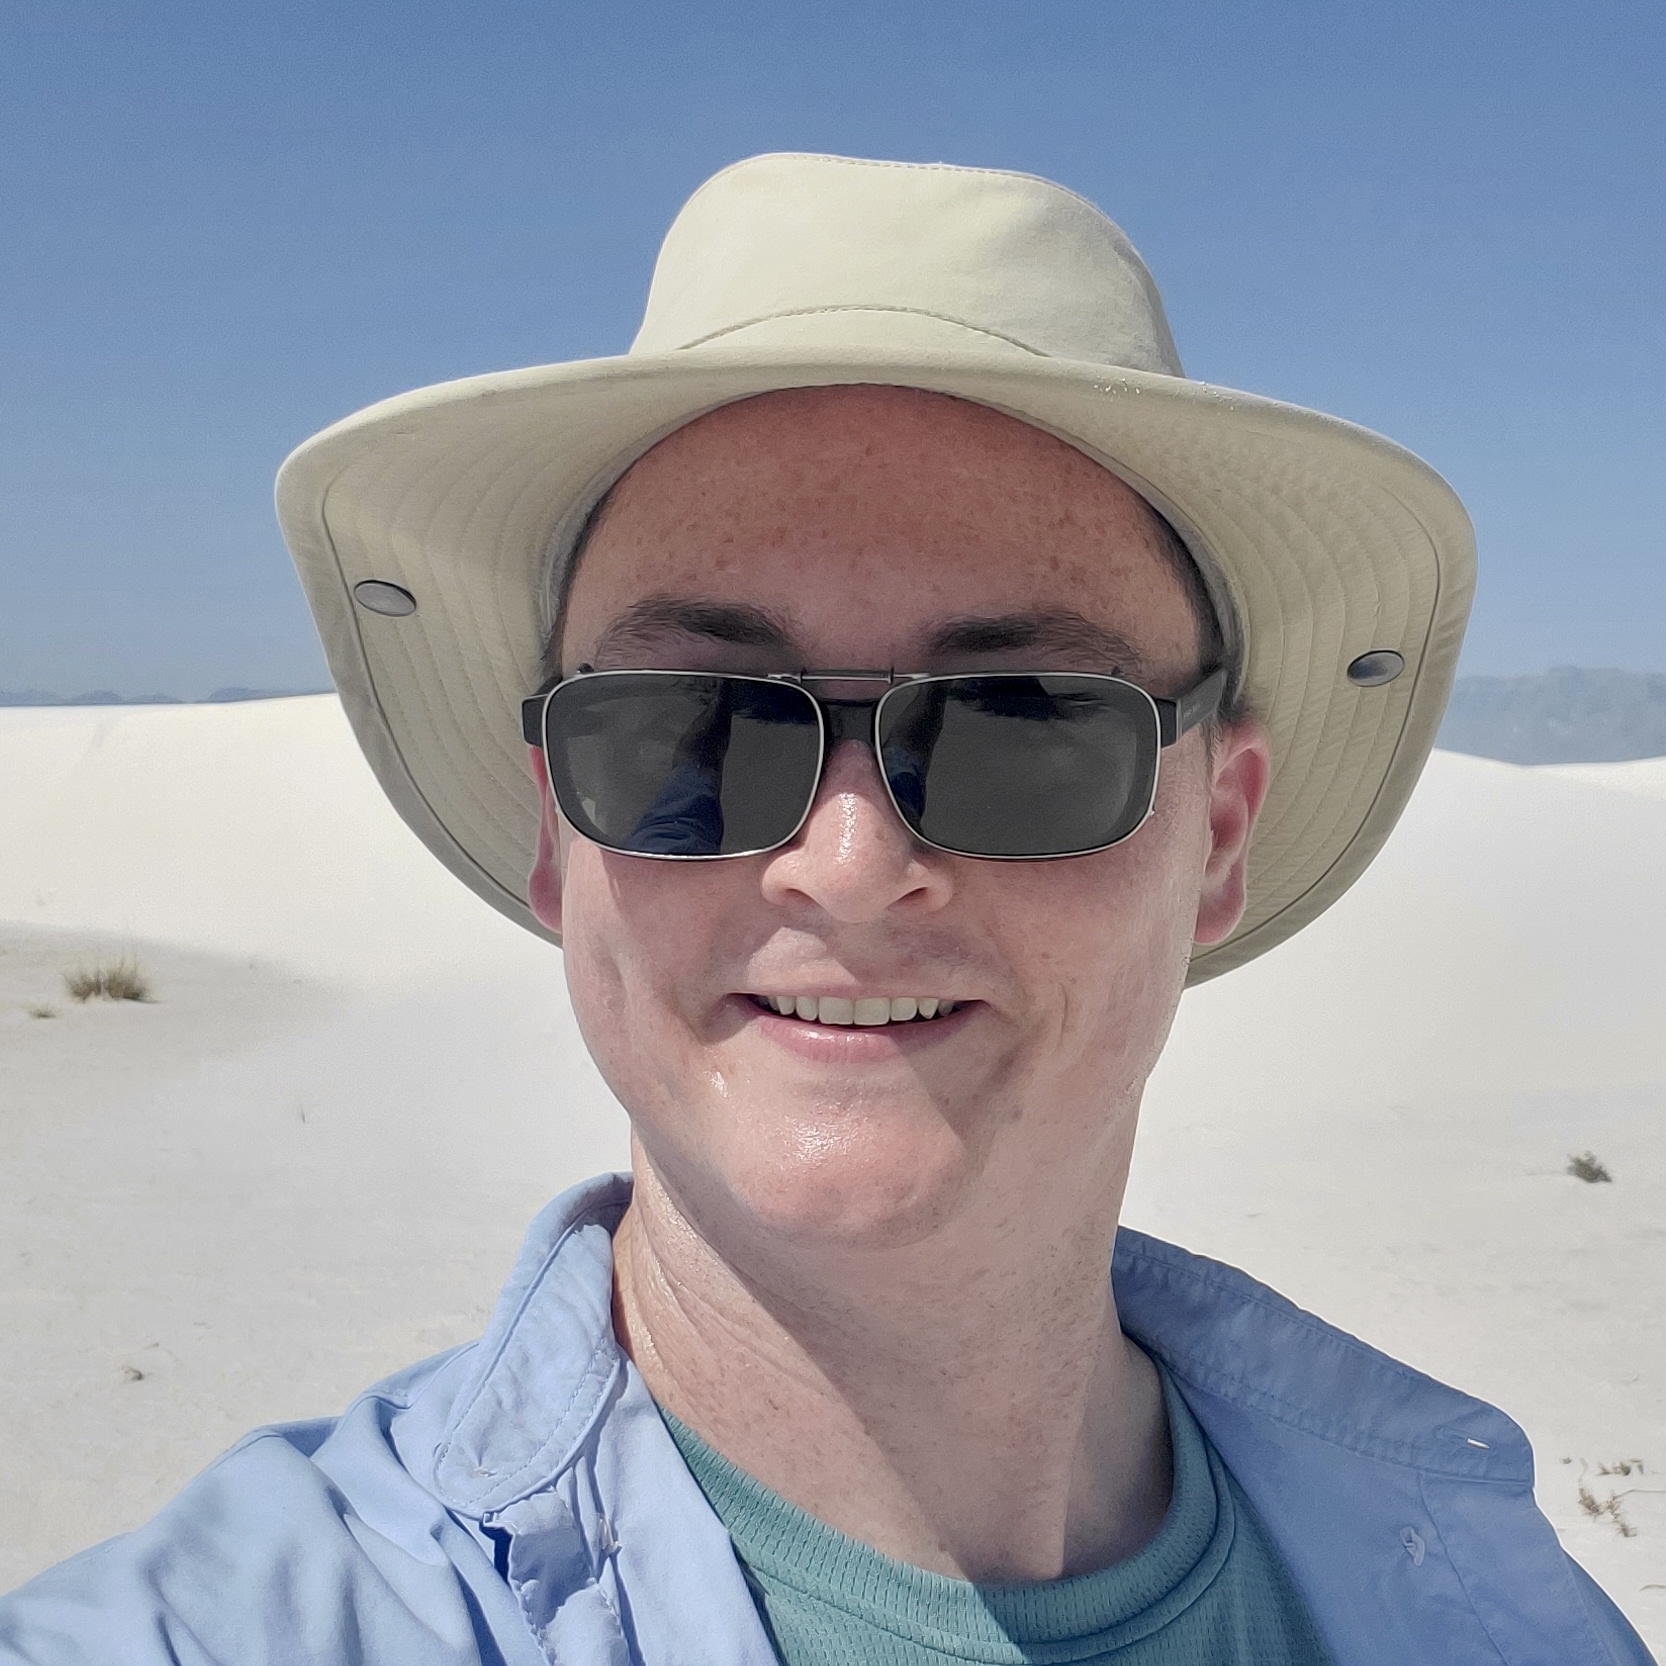 smiling person with pale skin wearing sunglasses, beige hat and blue shirt against a blue sky and sand background